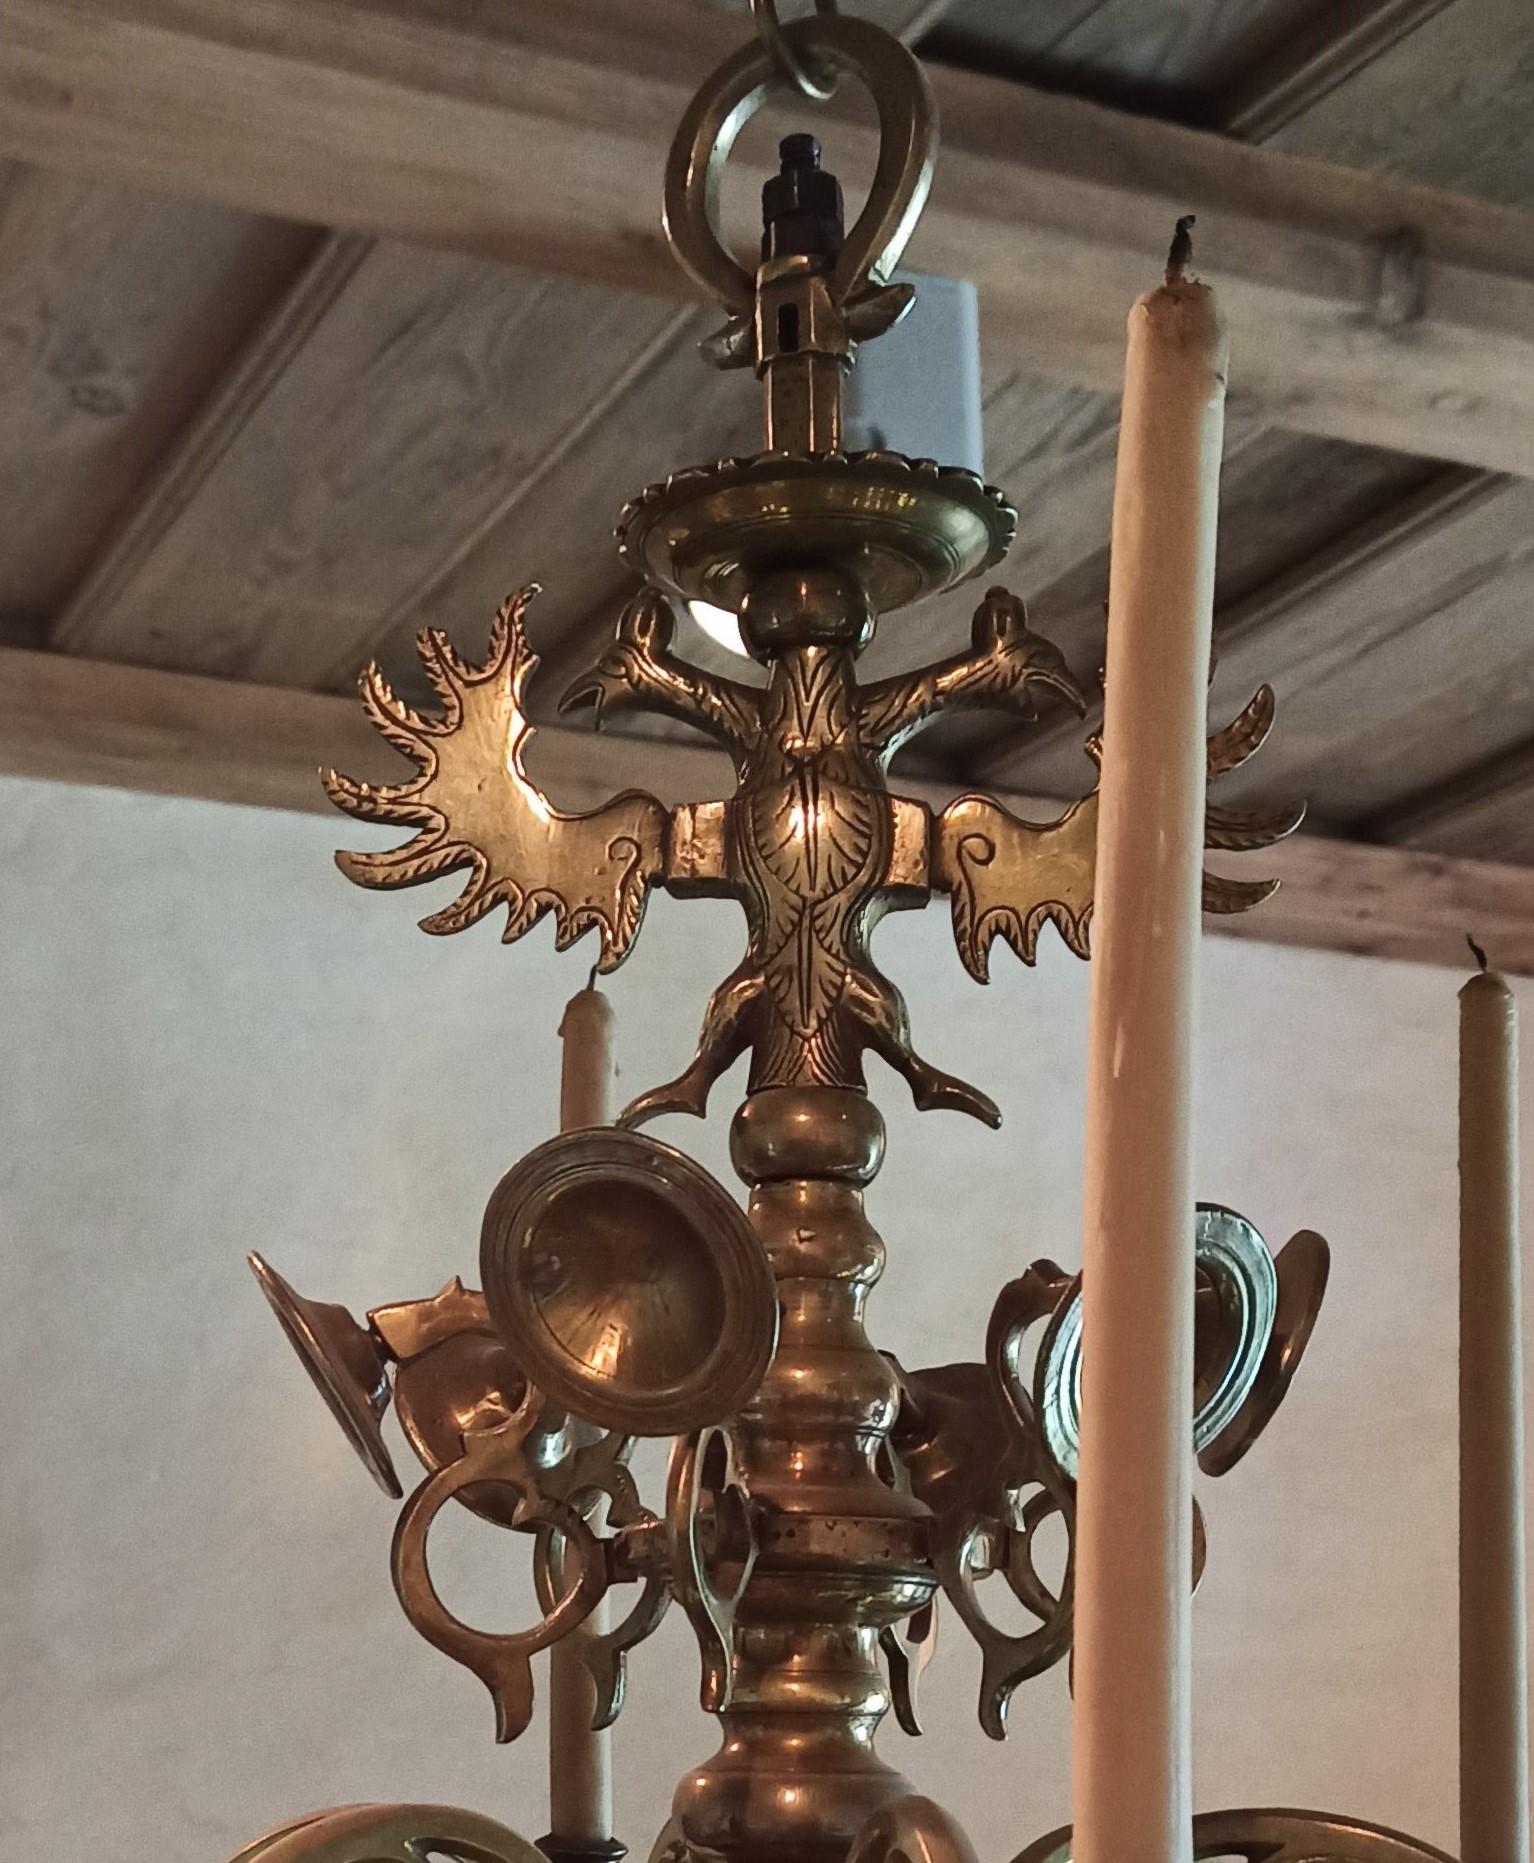 Fragment of the chandelier, 18th c., VRVM 51936, Museum of the History of Riga and Navigation. Photo by Maruta Eistere, 2022